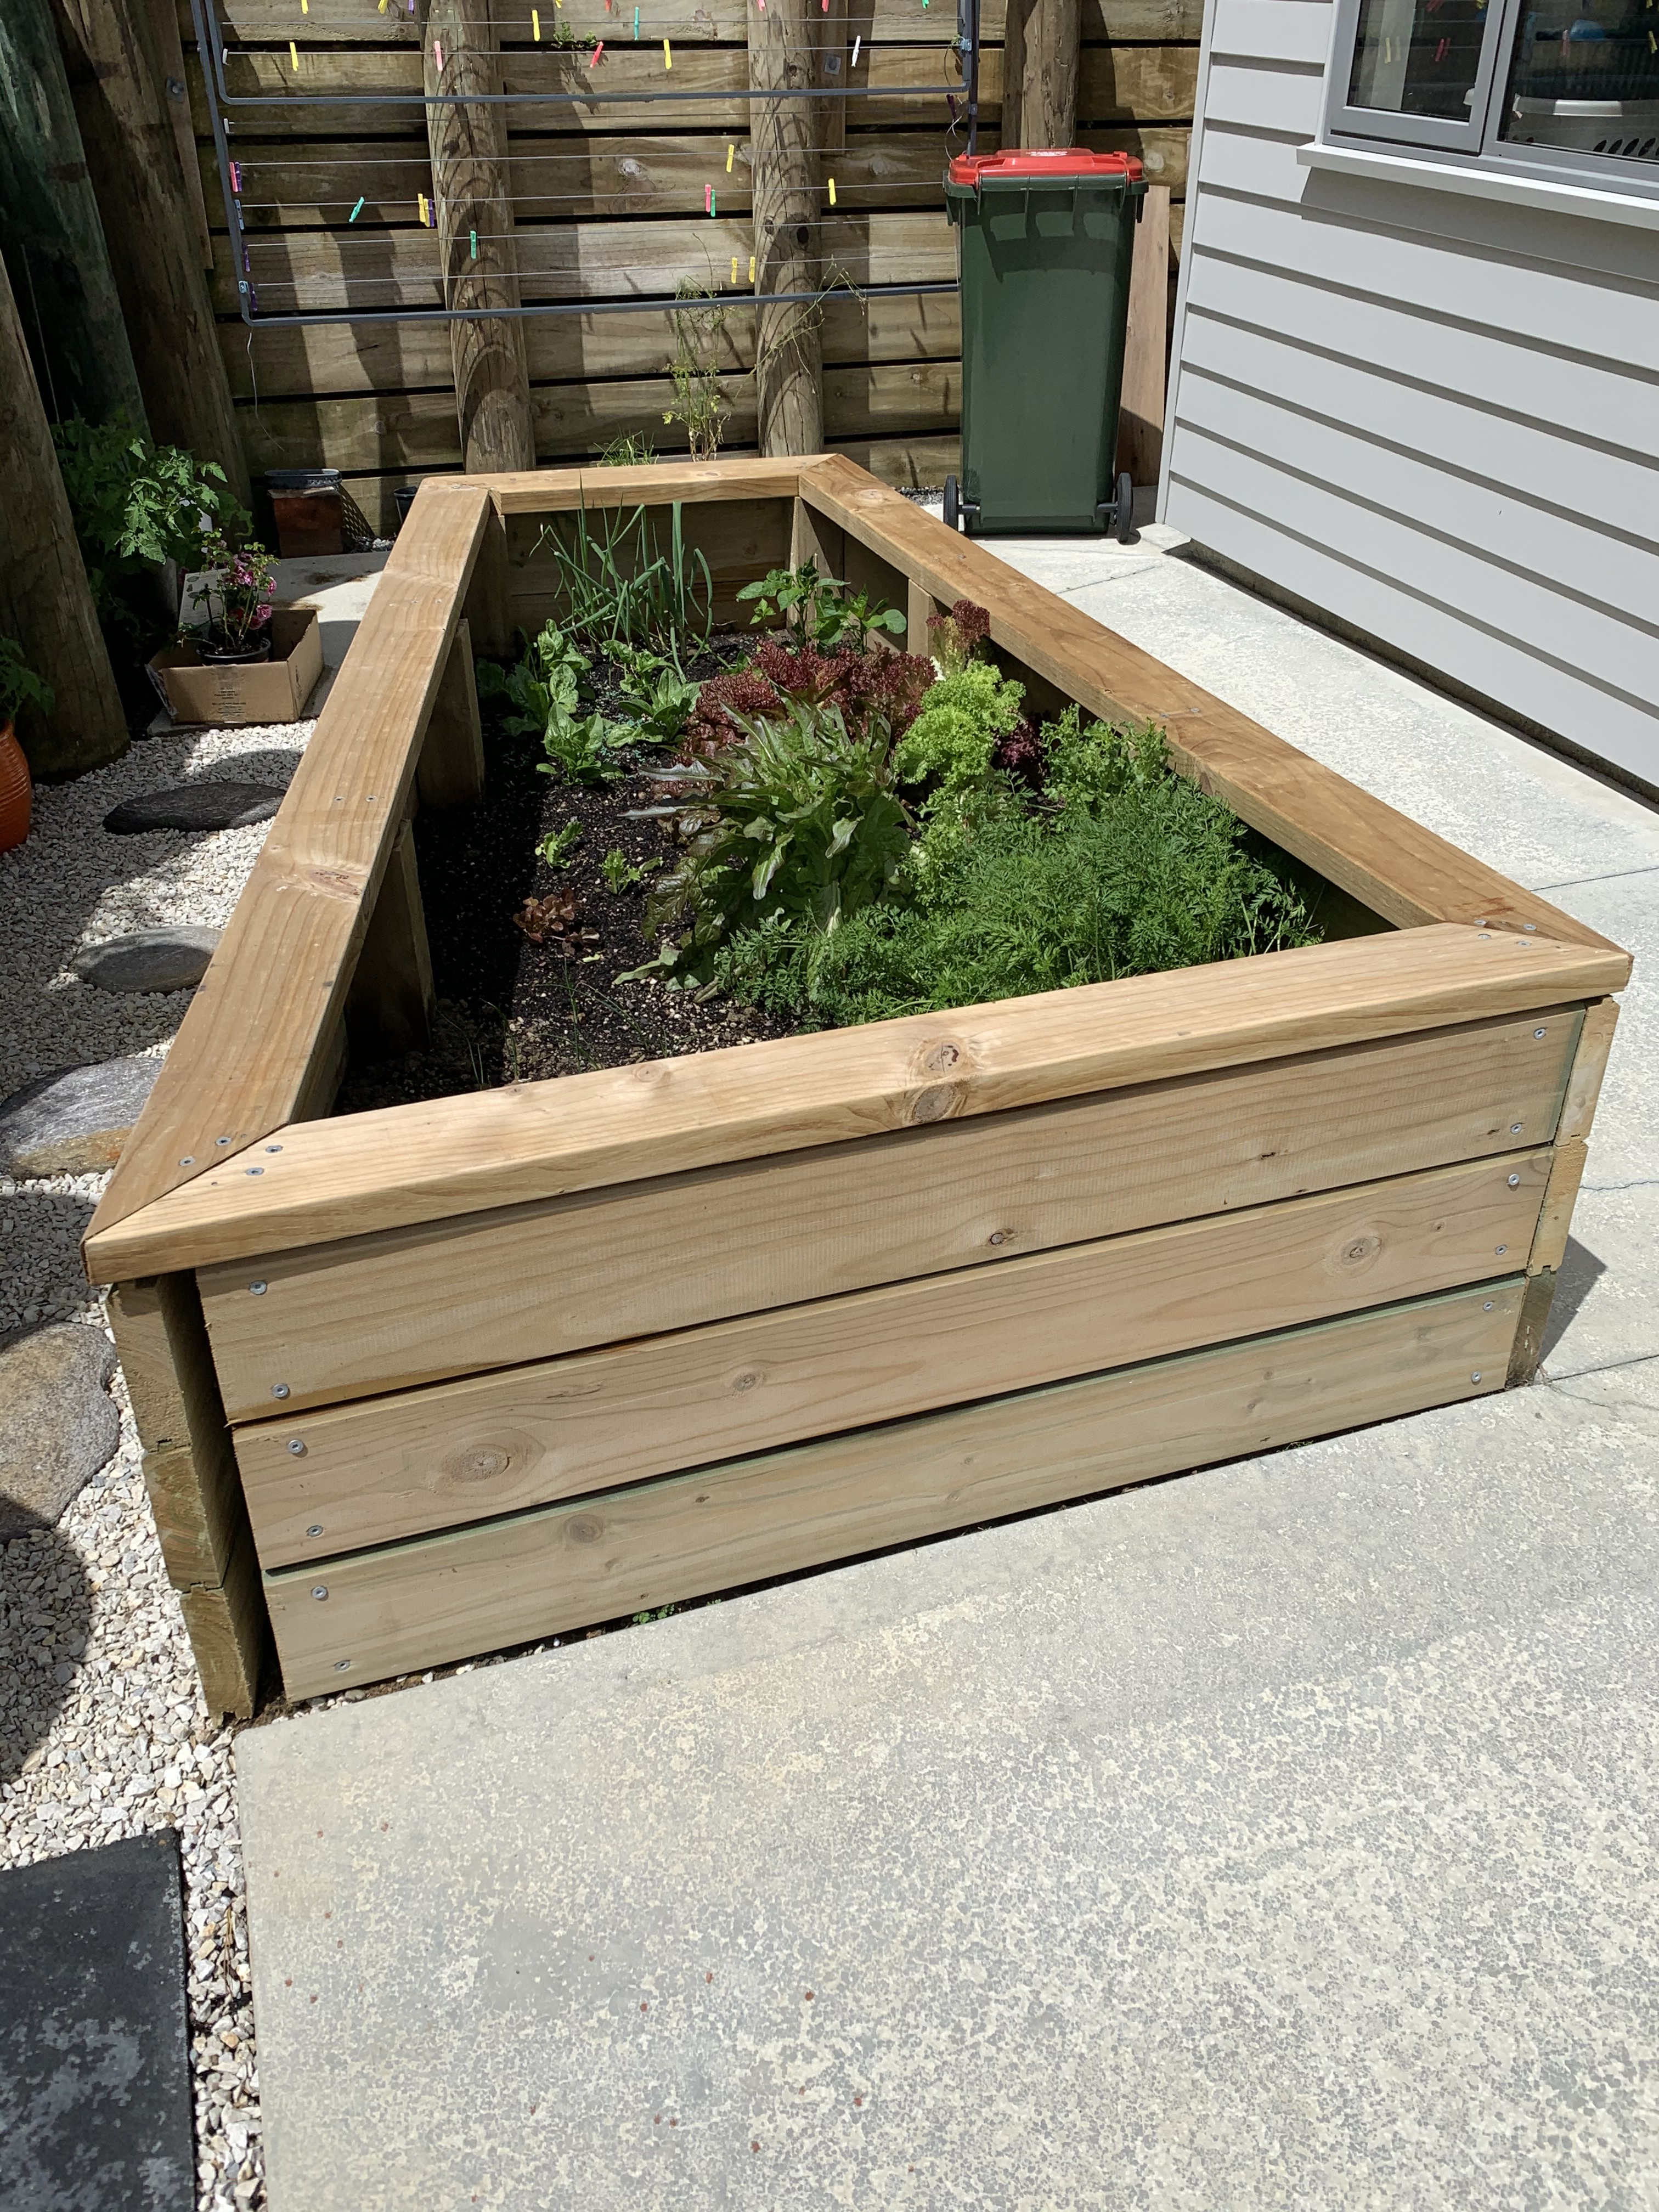 Wellington townhouse raised planter box with veges, pavers, ground cover and clothesline - by Grumpy Bob